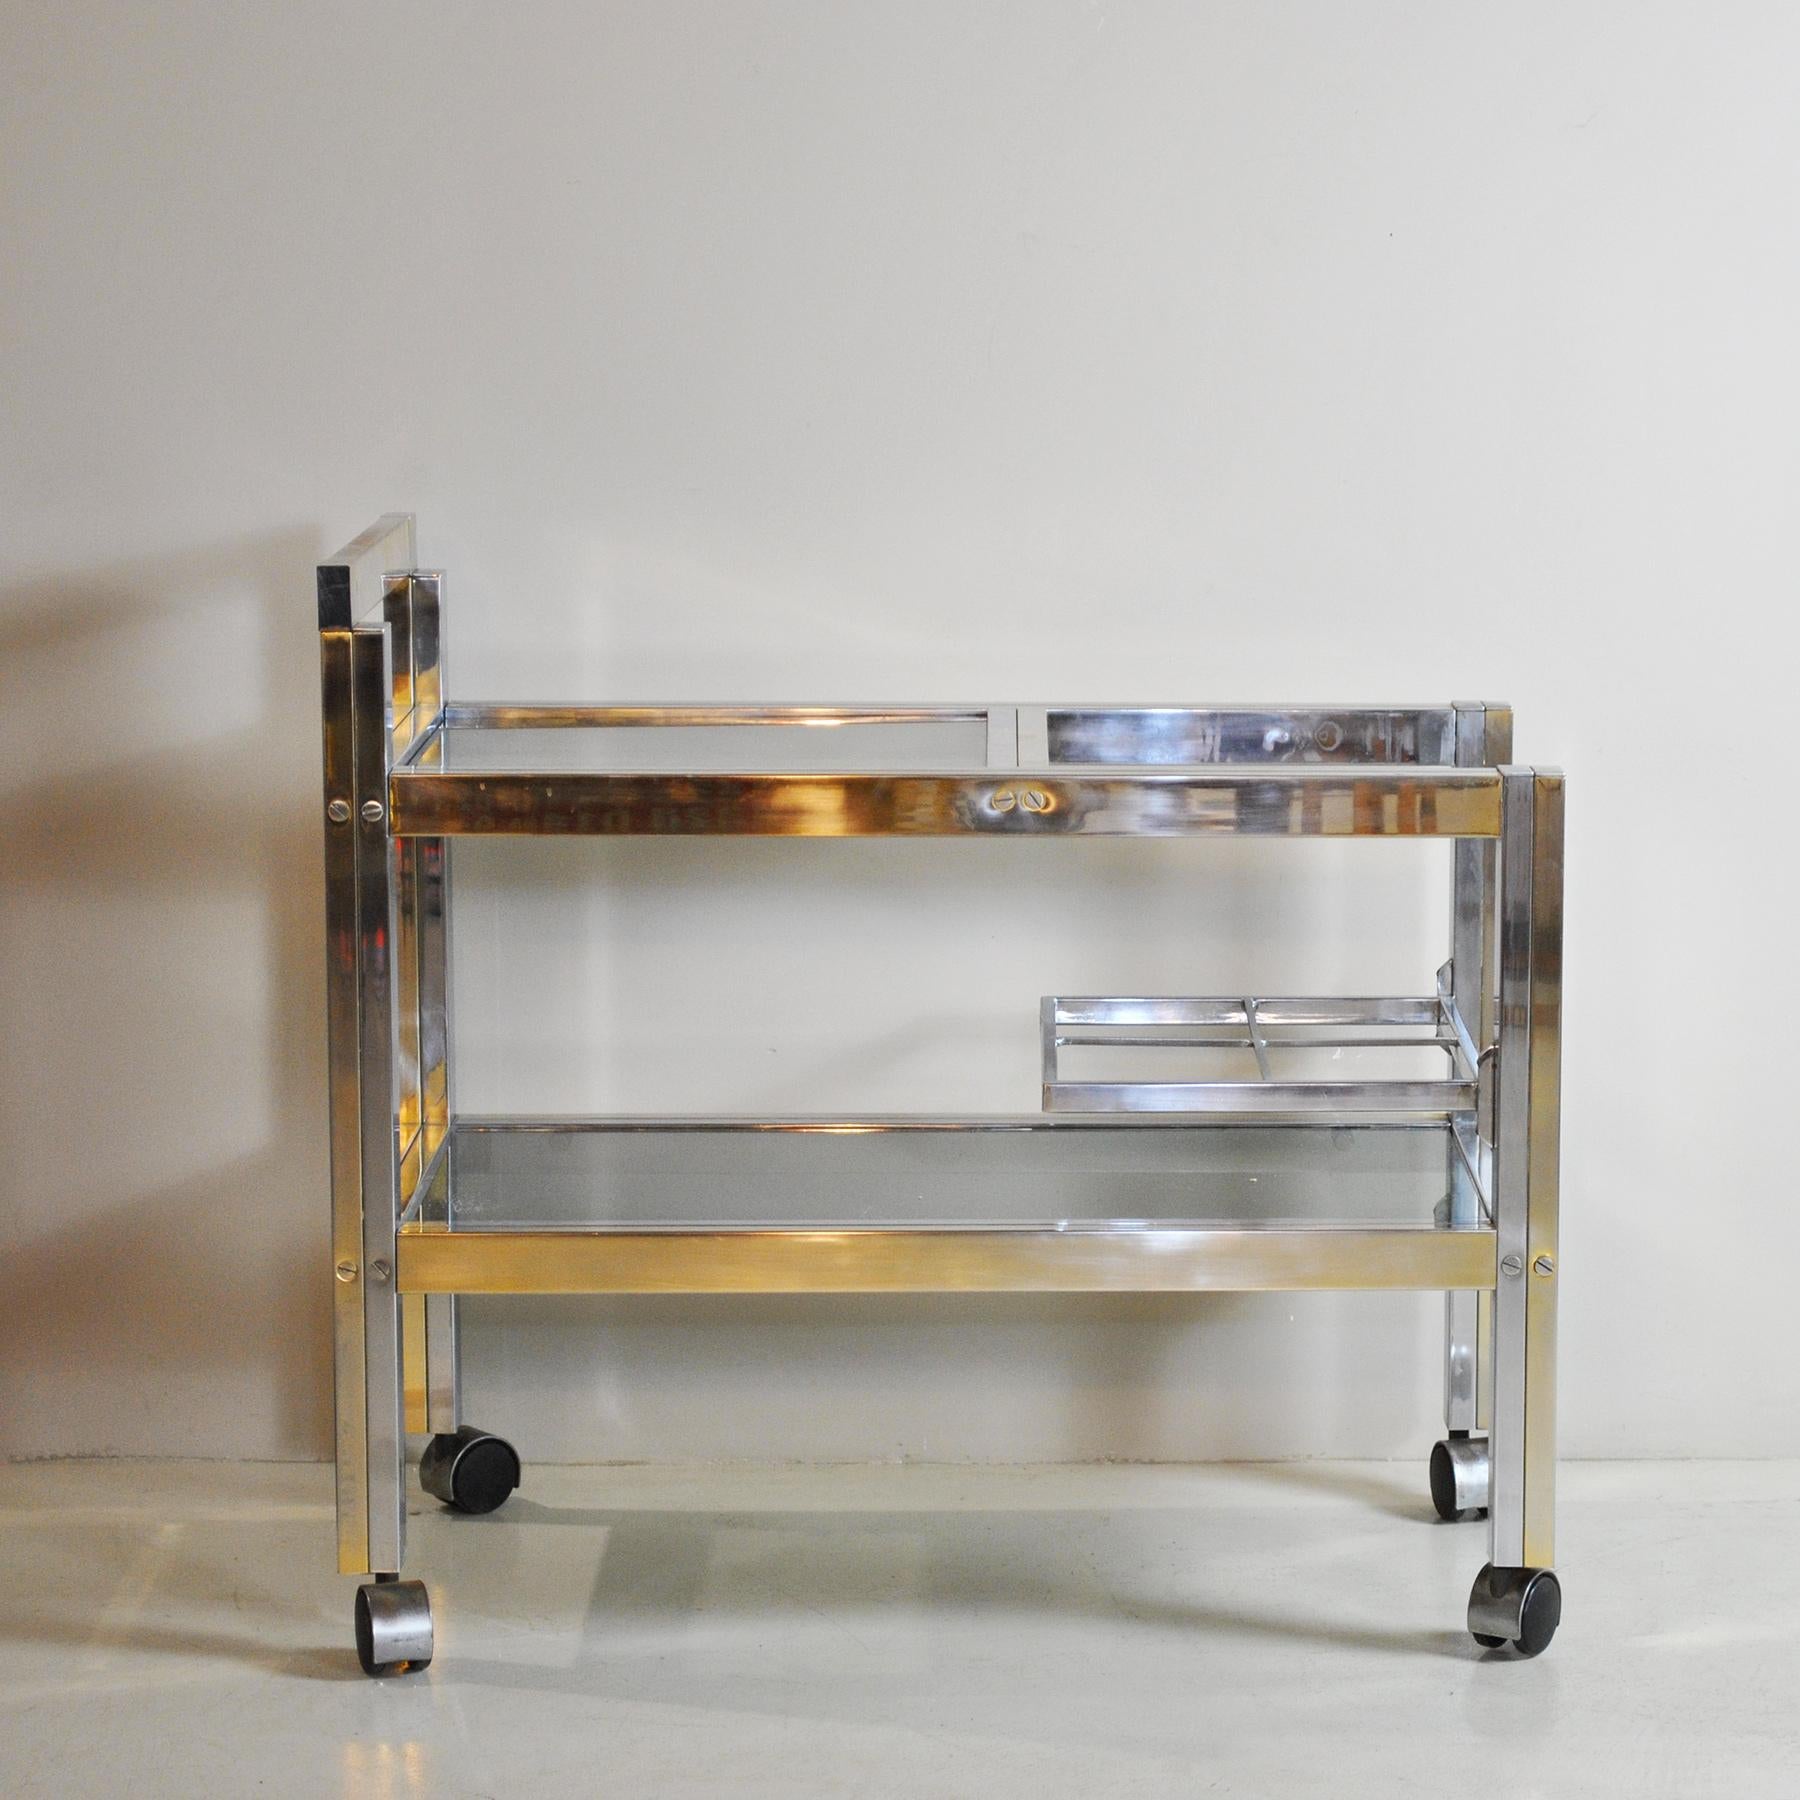 Late 20th Century Italian Trolley Bar in Brass and Steel 70's style Romeo Rega For Sale